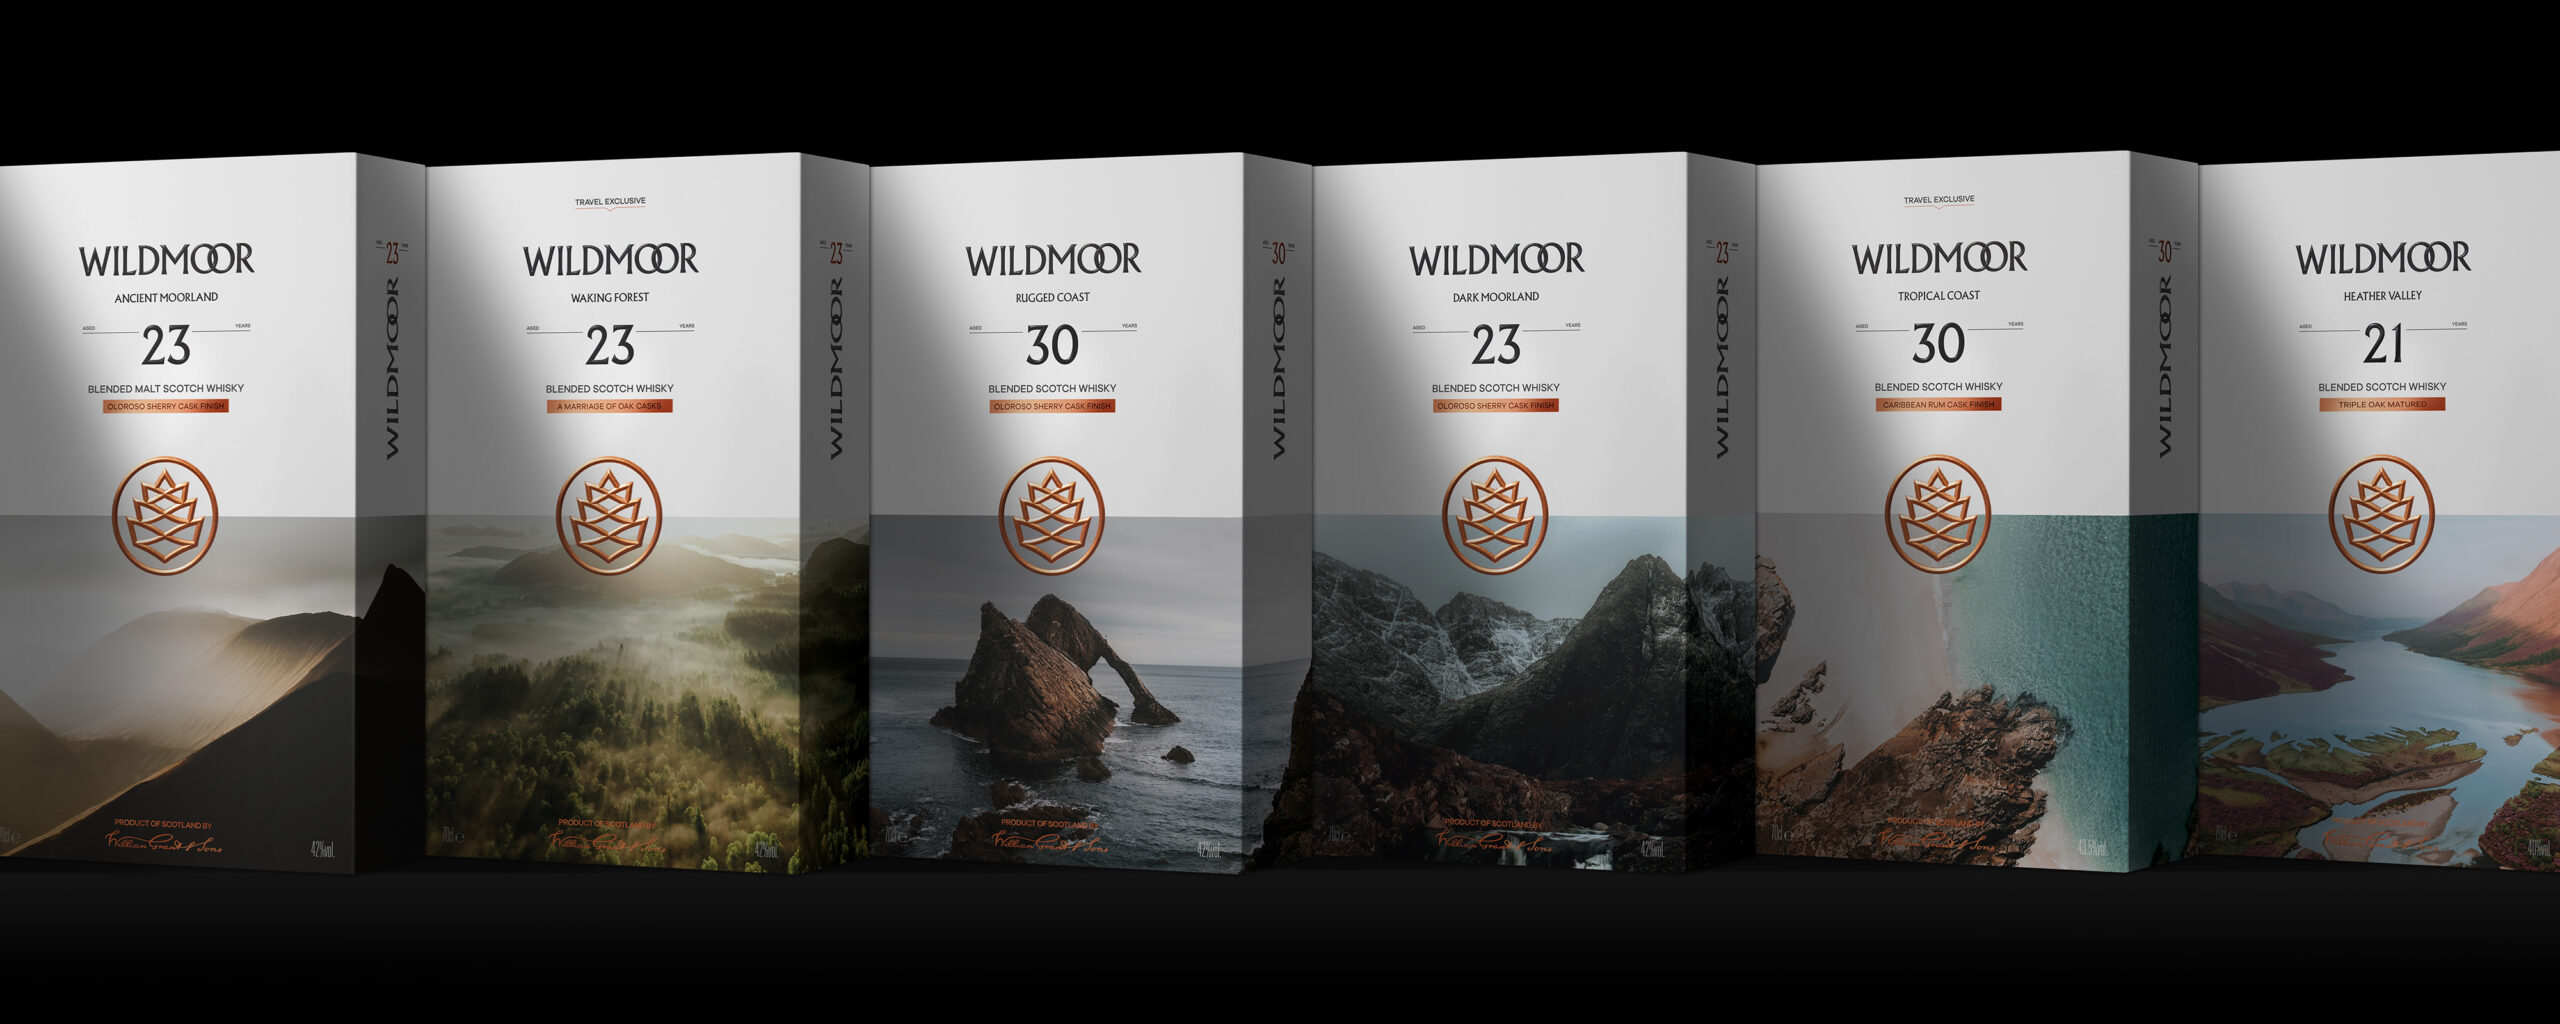 Introducing Wildmoor: A New Blended Scotch Whisky Designed by LOVE for William Grant & Sons